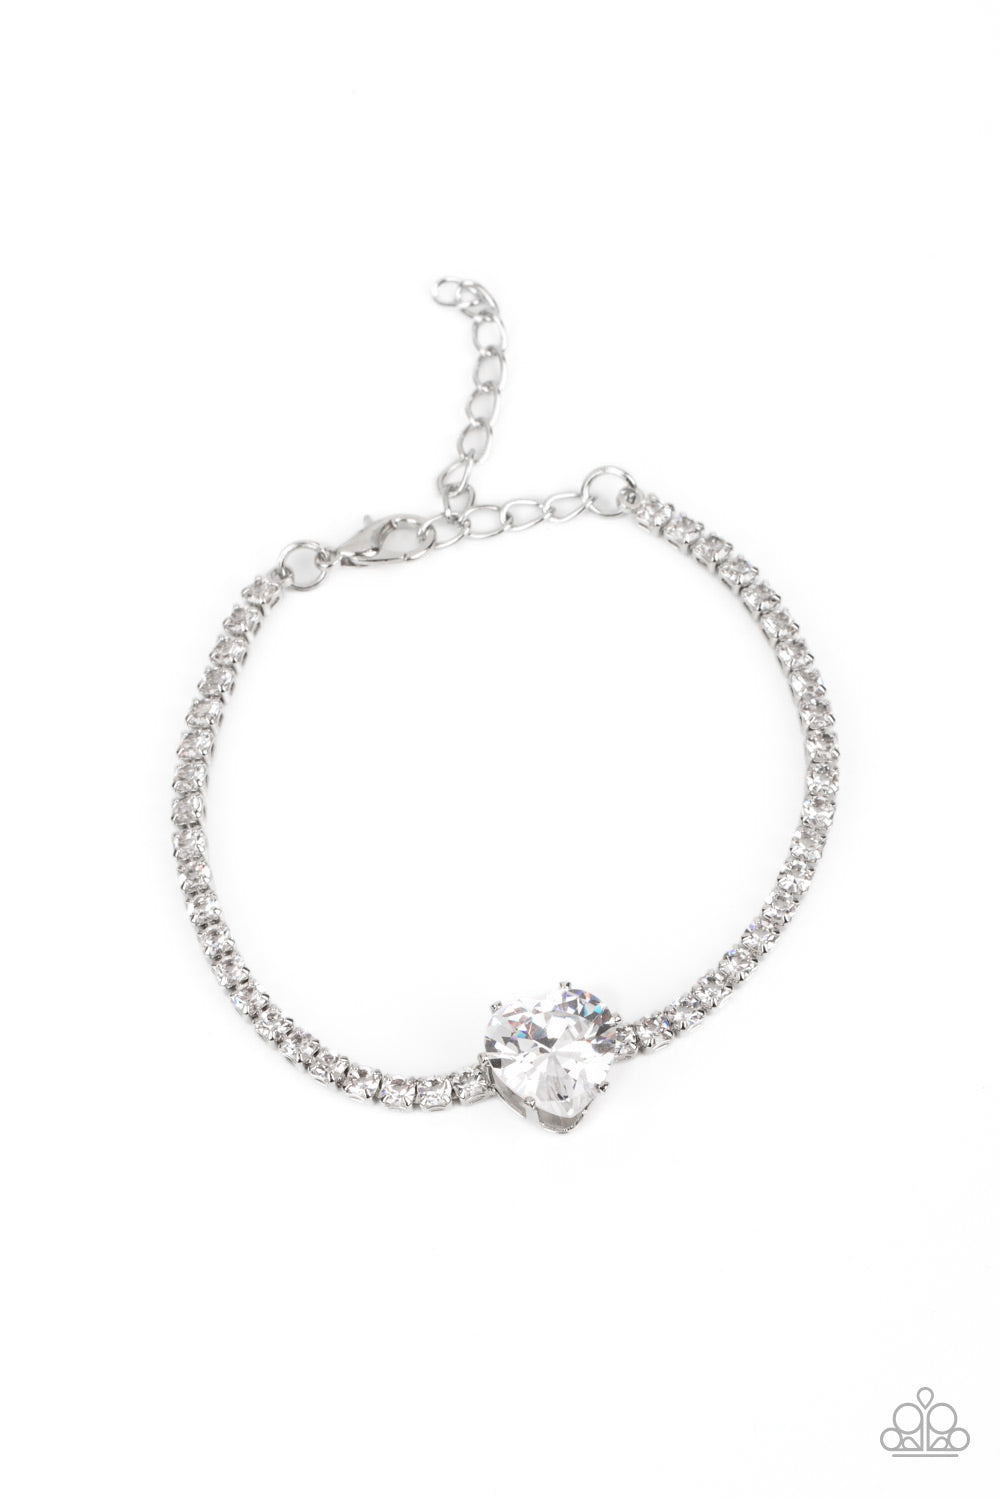 Paparazzi Accessories Bedazzled Beauty - White An oversized white heart-shaped gem, set in an airy, pronged silver fitting, glitters at the center of a blinding row of dainty, glassy white rhinestones set in square silver fittings, resulting in a flirtati